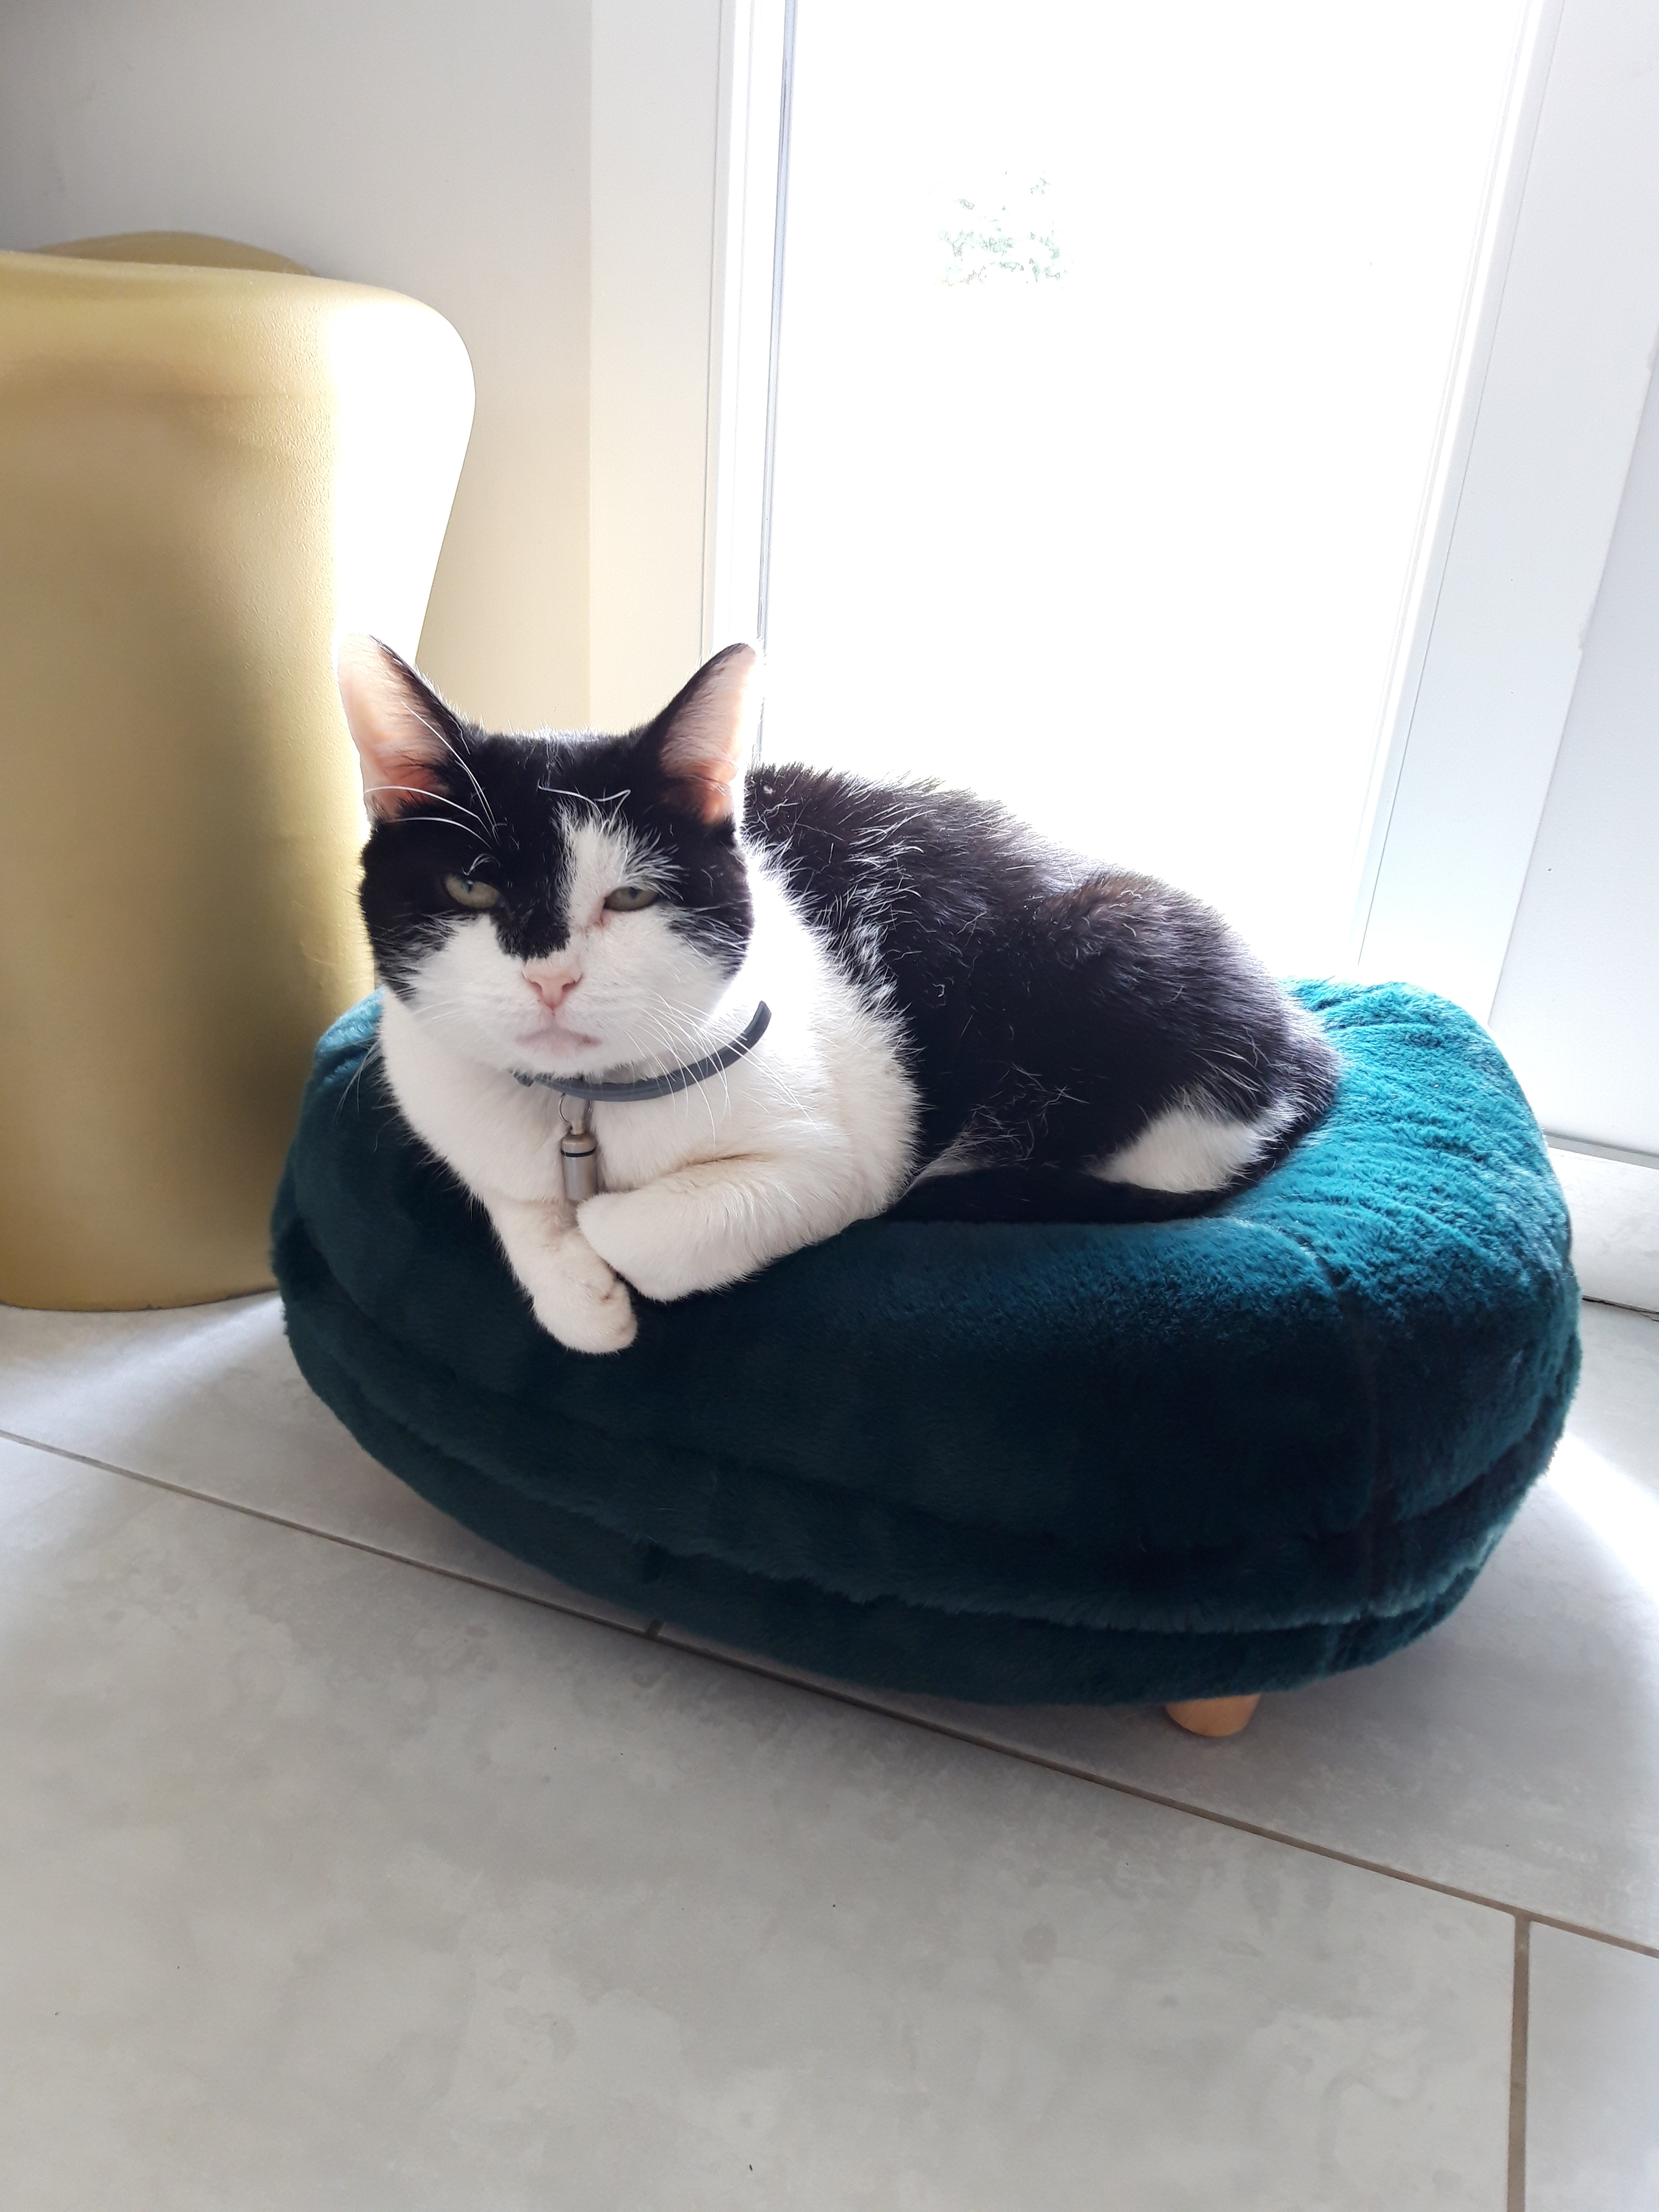 A cat resting in his blue donut shaped cat bed